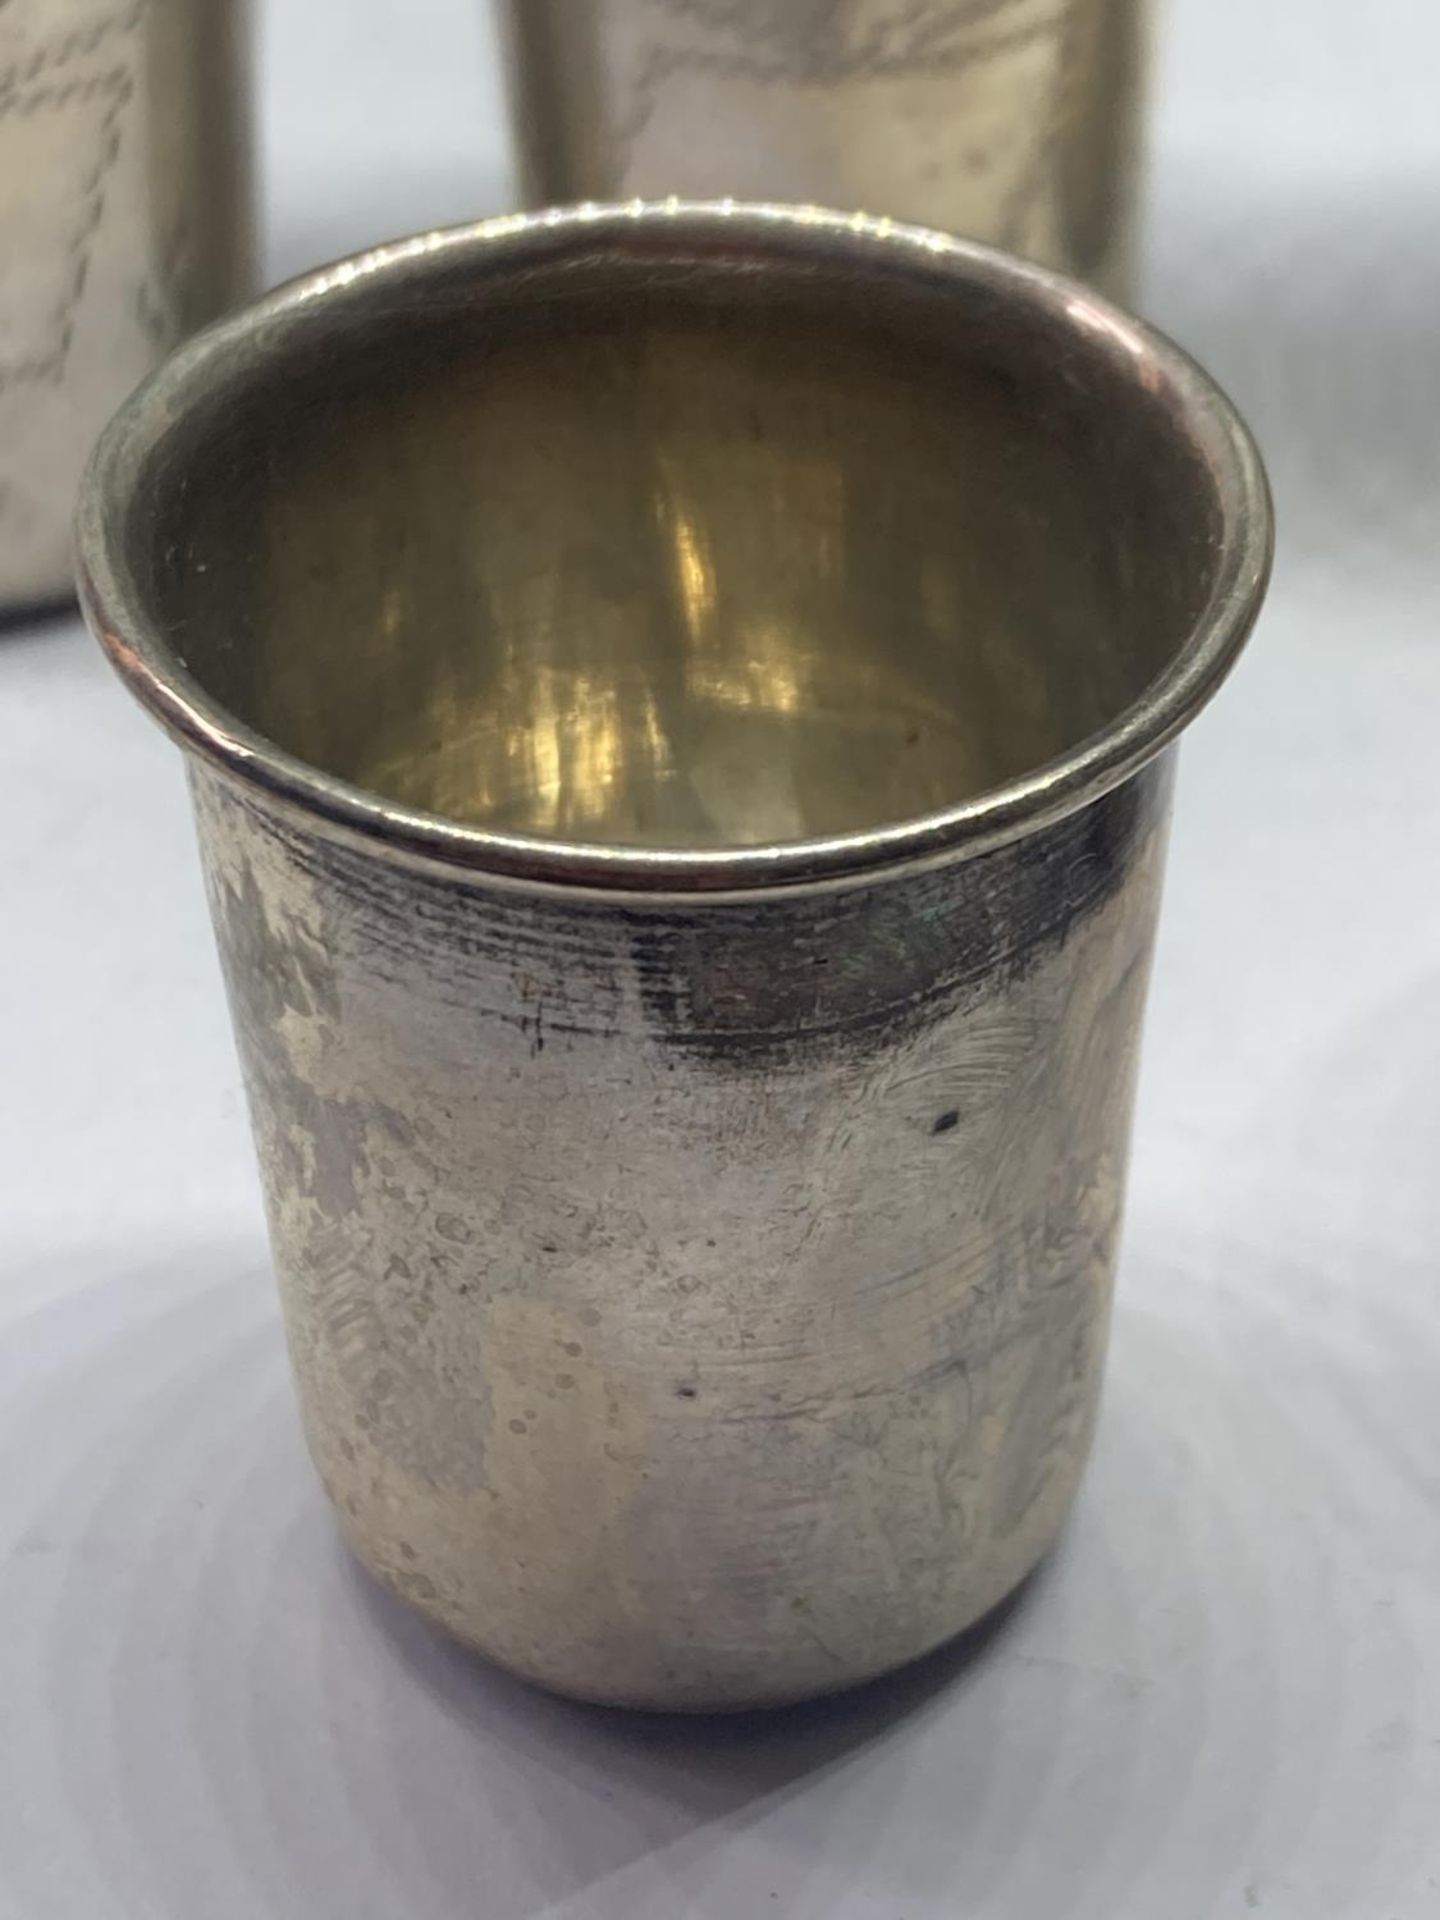 SIX STIRRUP CUPS MARKET LO SILVER 833 GROSS WEIGHT 48 GRAMS - Image 3 of 4